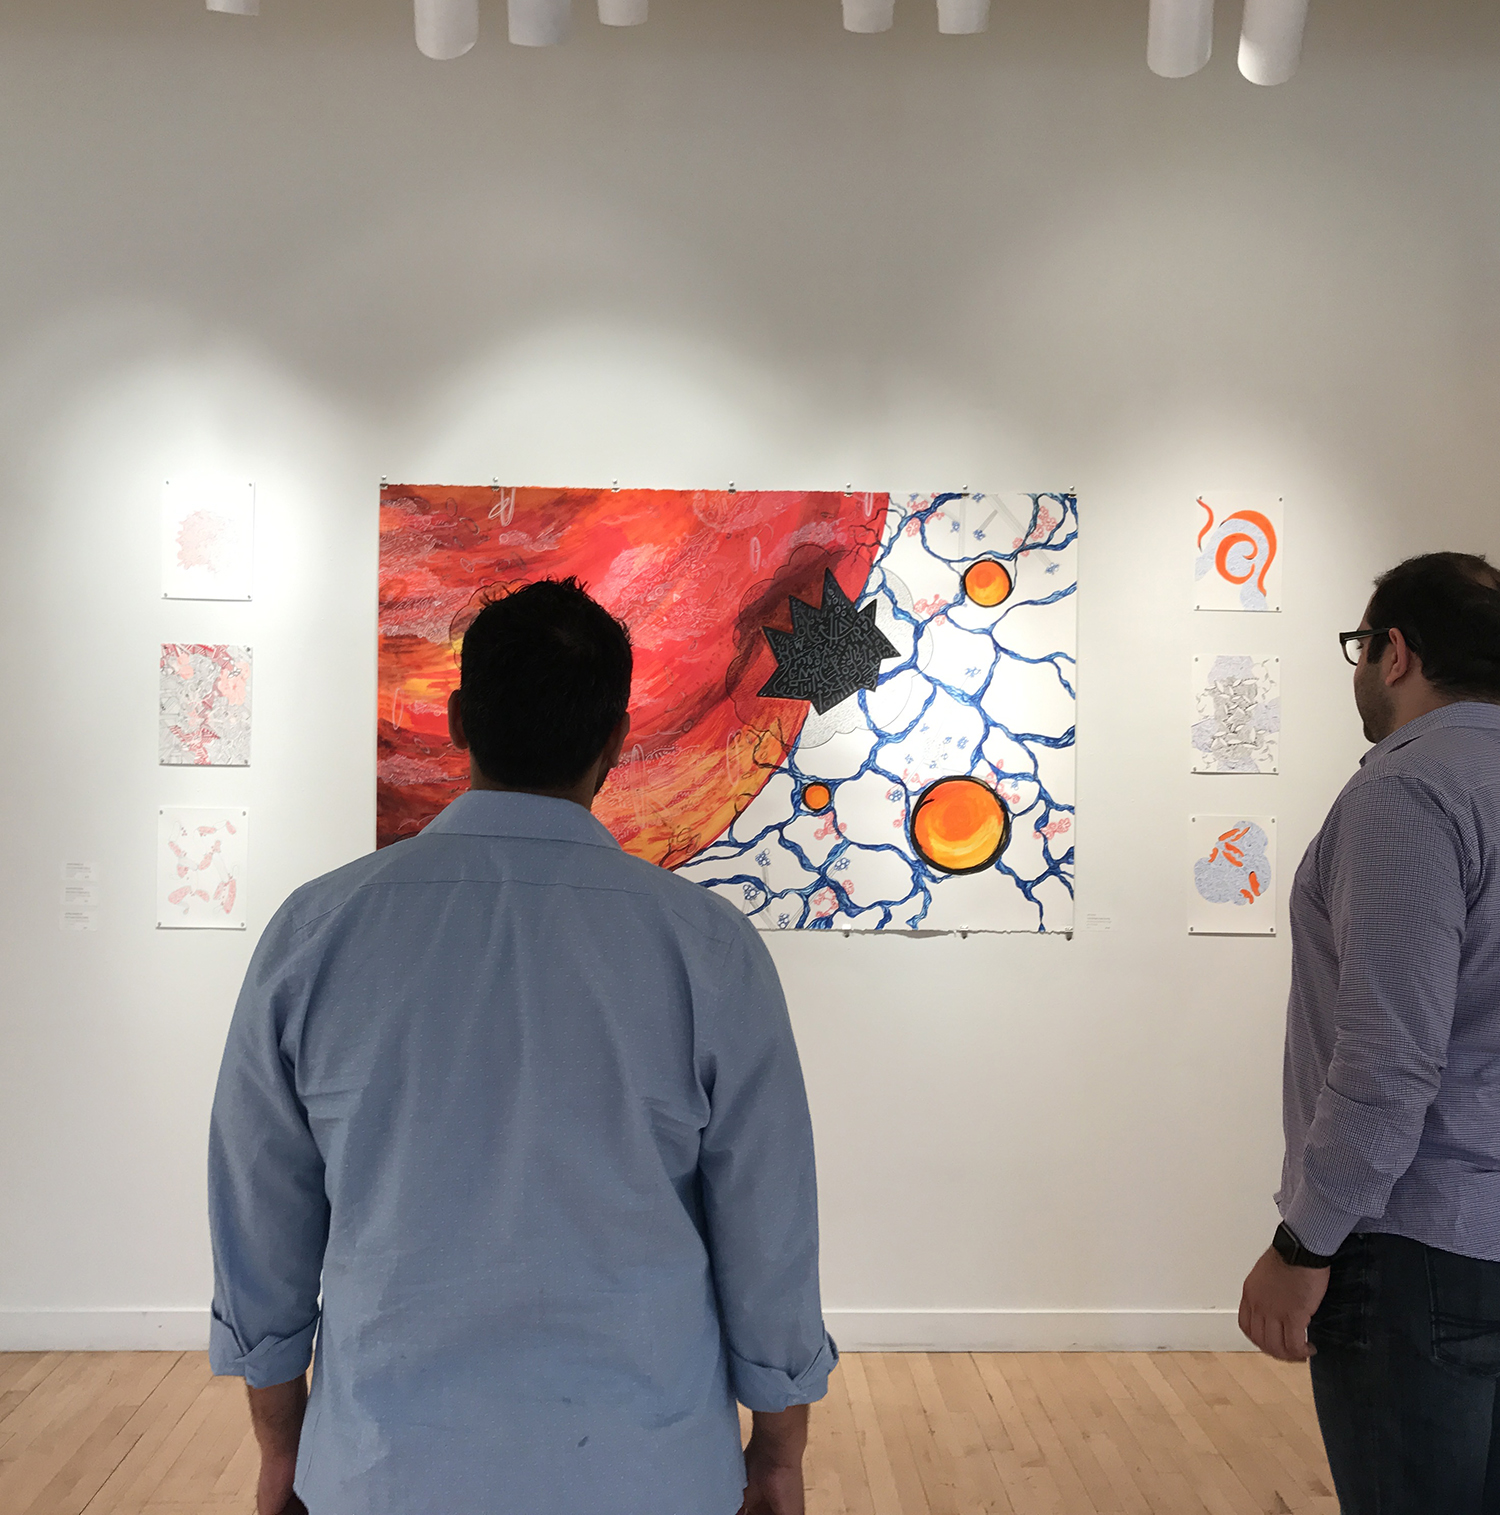 Visitors at the Opening reception of the Shared Energies project, Princeton 2017